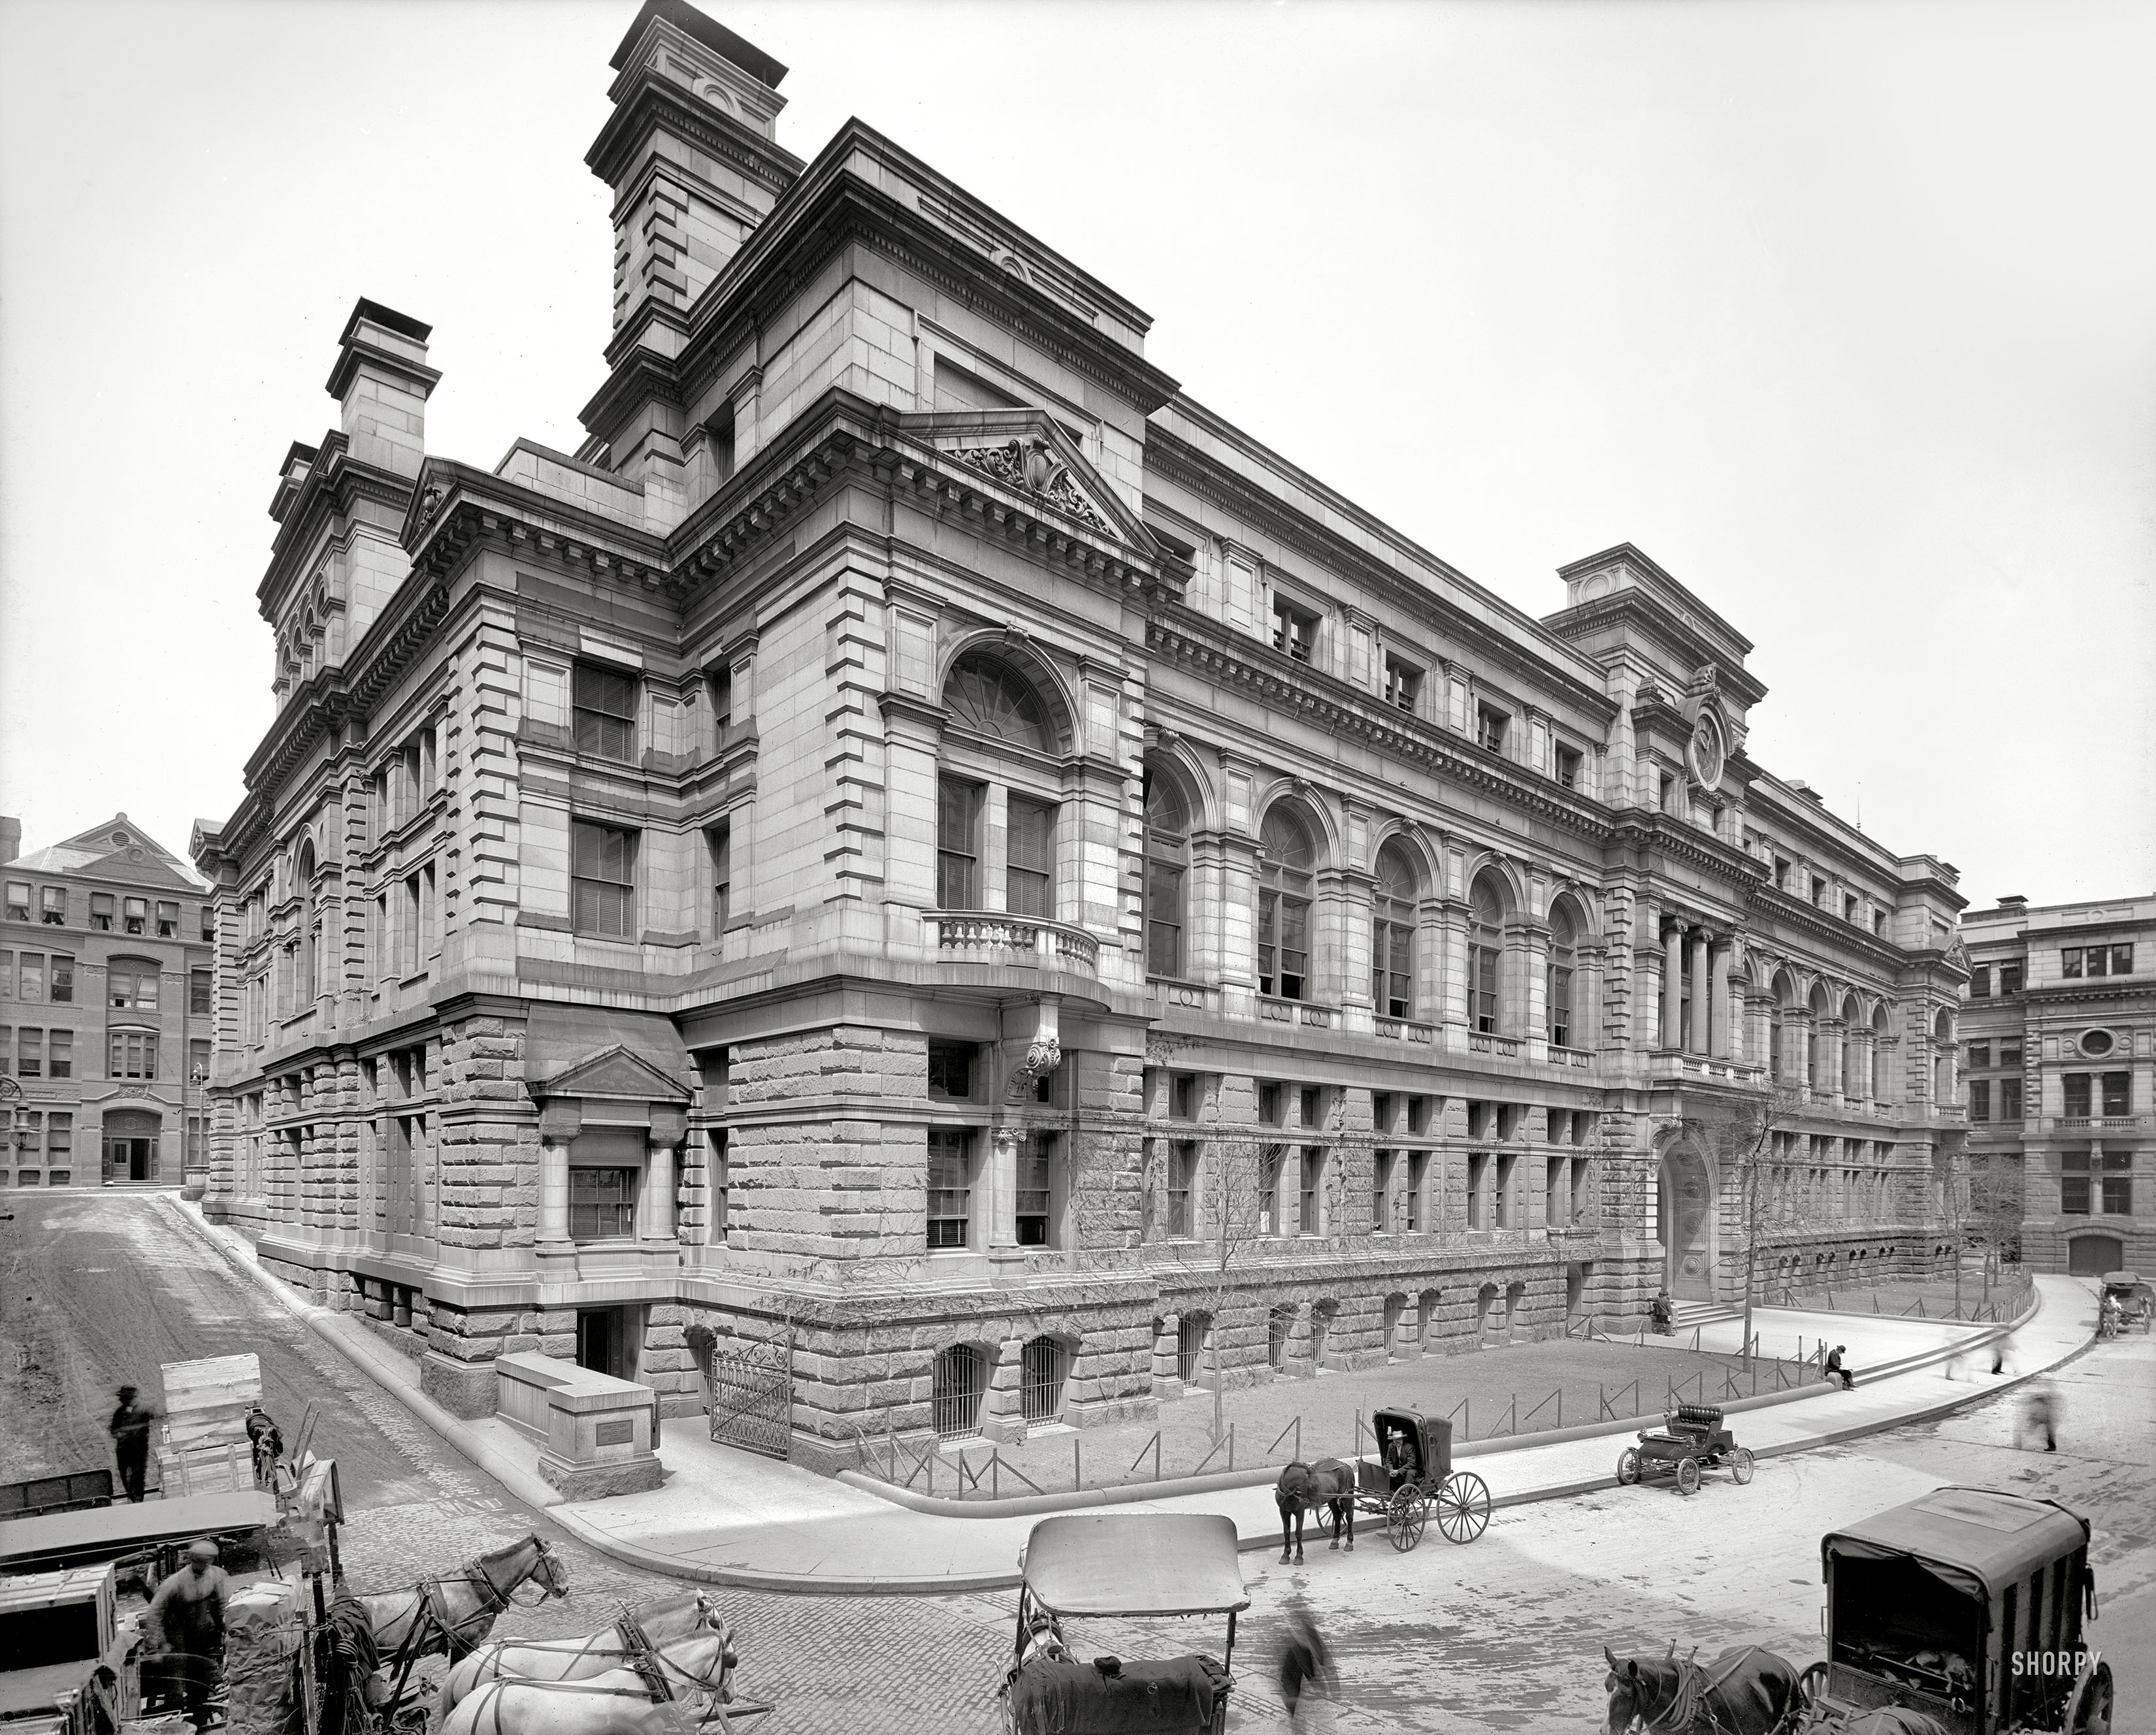 Boston circa 1906. "Courthouse, Pemberton Square." The Suffolk County Courthouse, a.k.a. John Adams Courthouse, completed 1893. View full size.